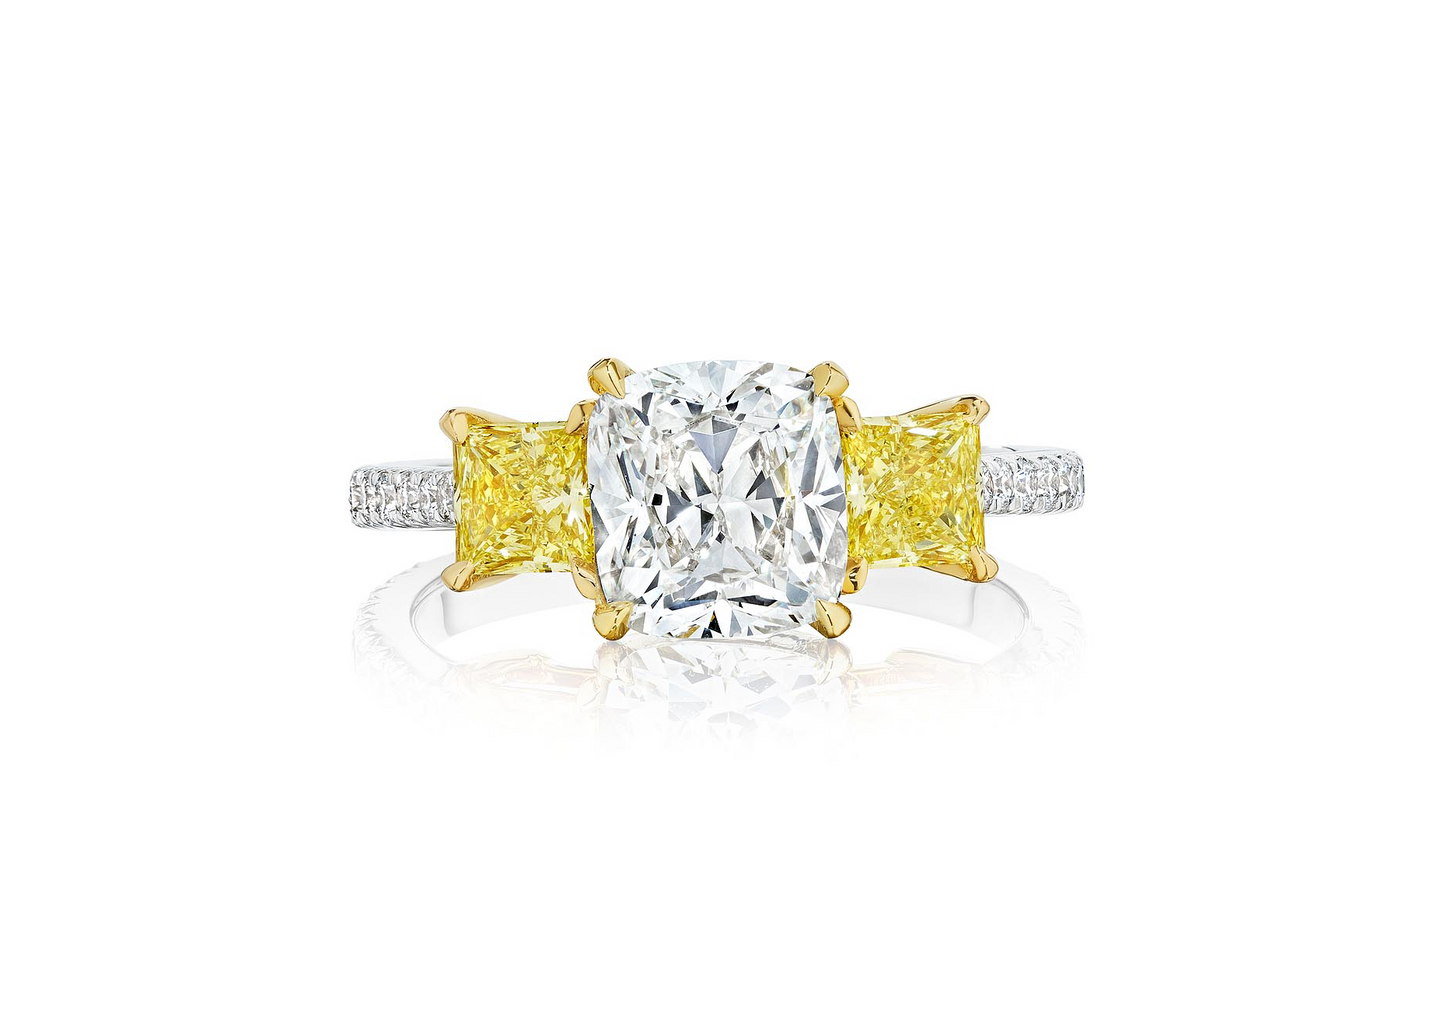 Fink's Exclusive White and Yellow Gold Cushion Diamond Engagement Ring with Fancy Yellow Diamond Accents